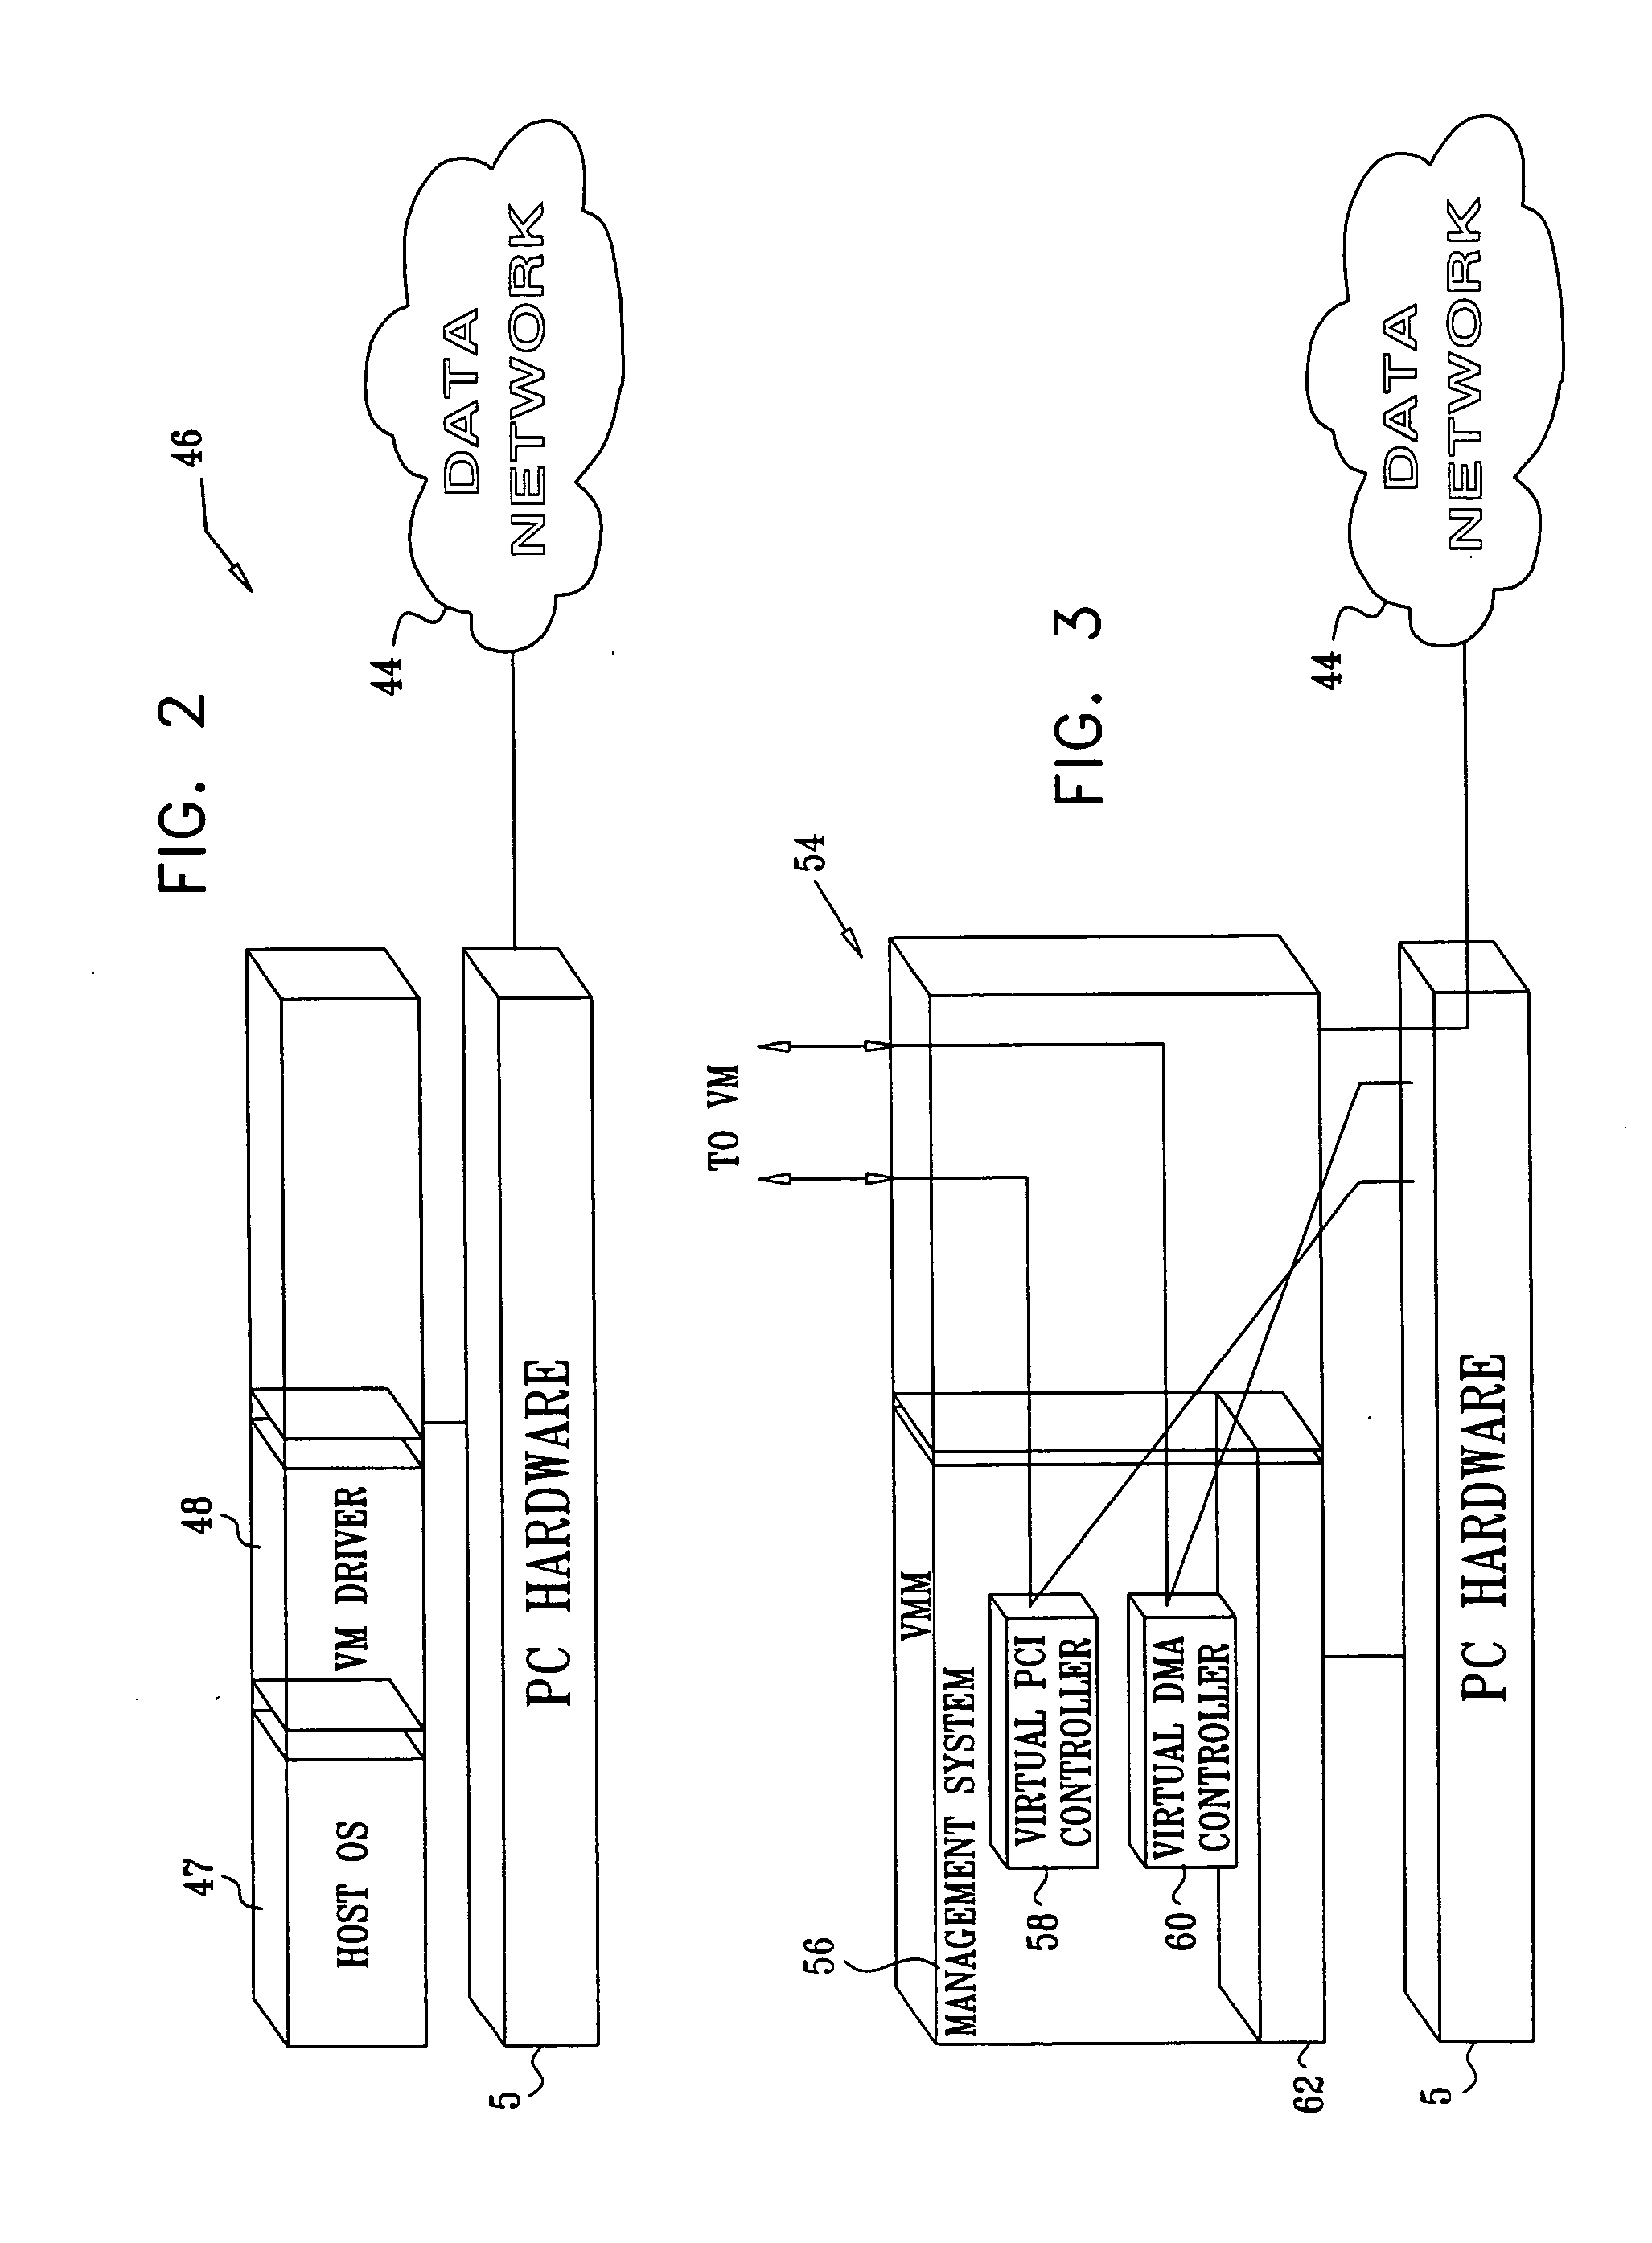 Cluster-based operating system-agnostic virtual computing system